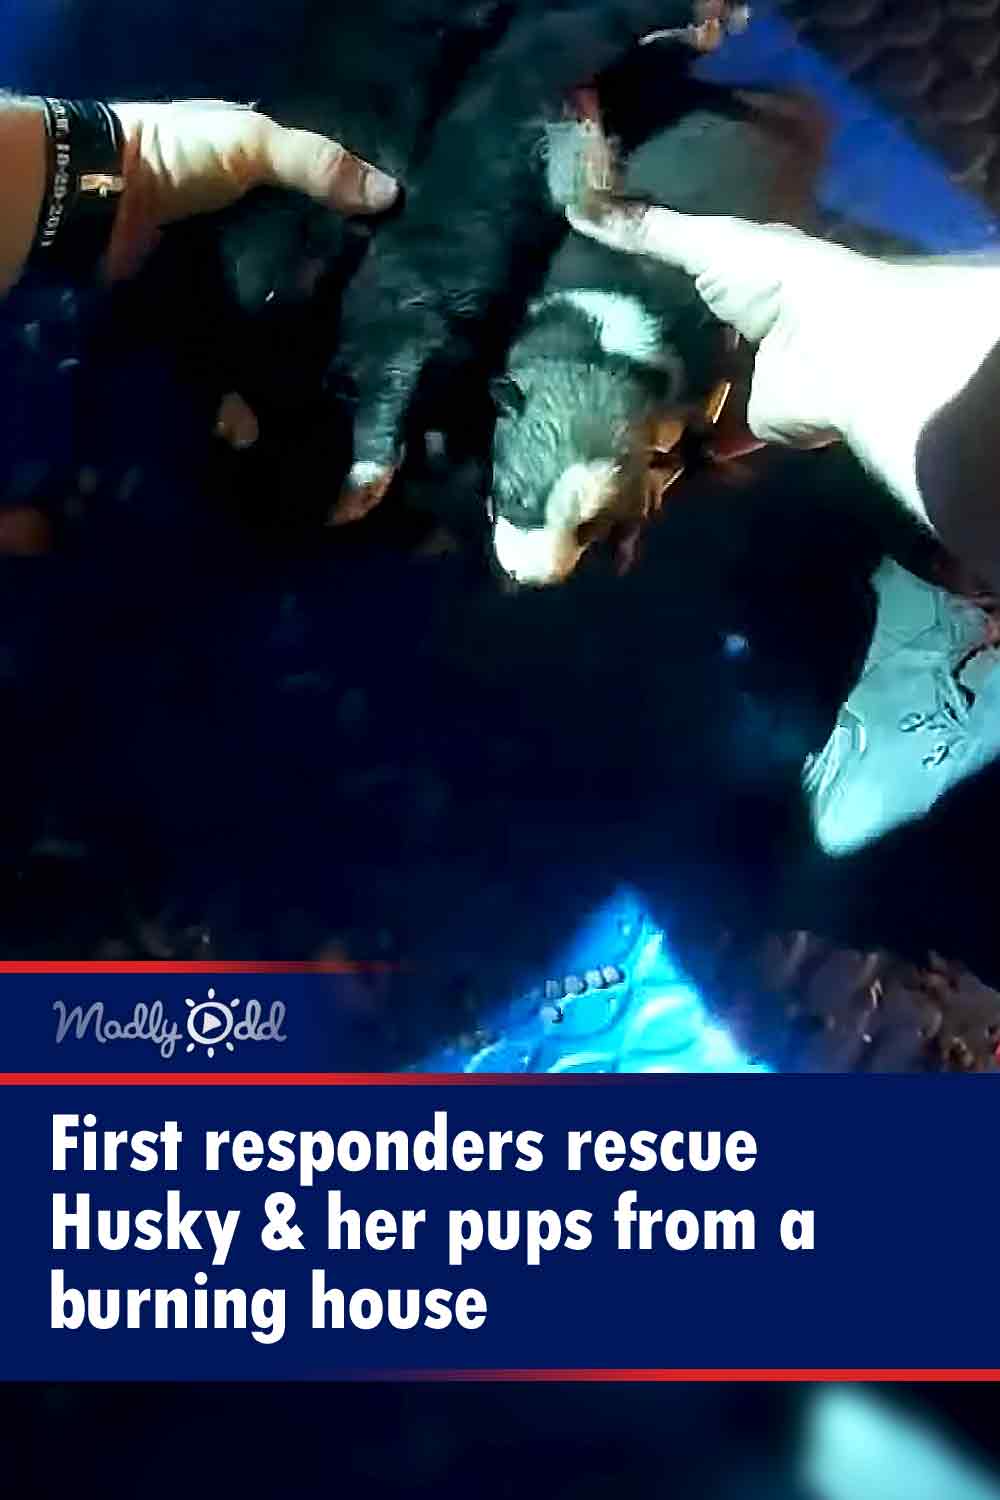 First responders rescue Husky & her pups from a burning house